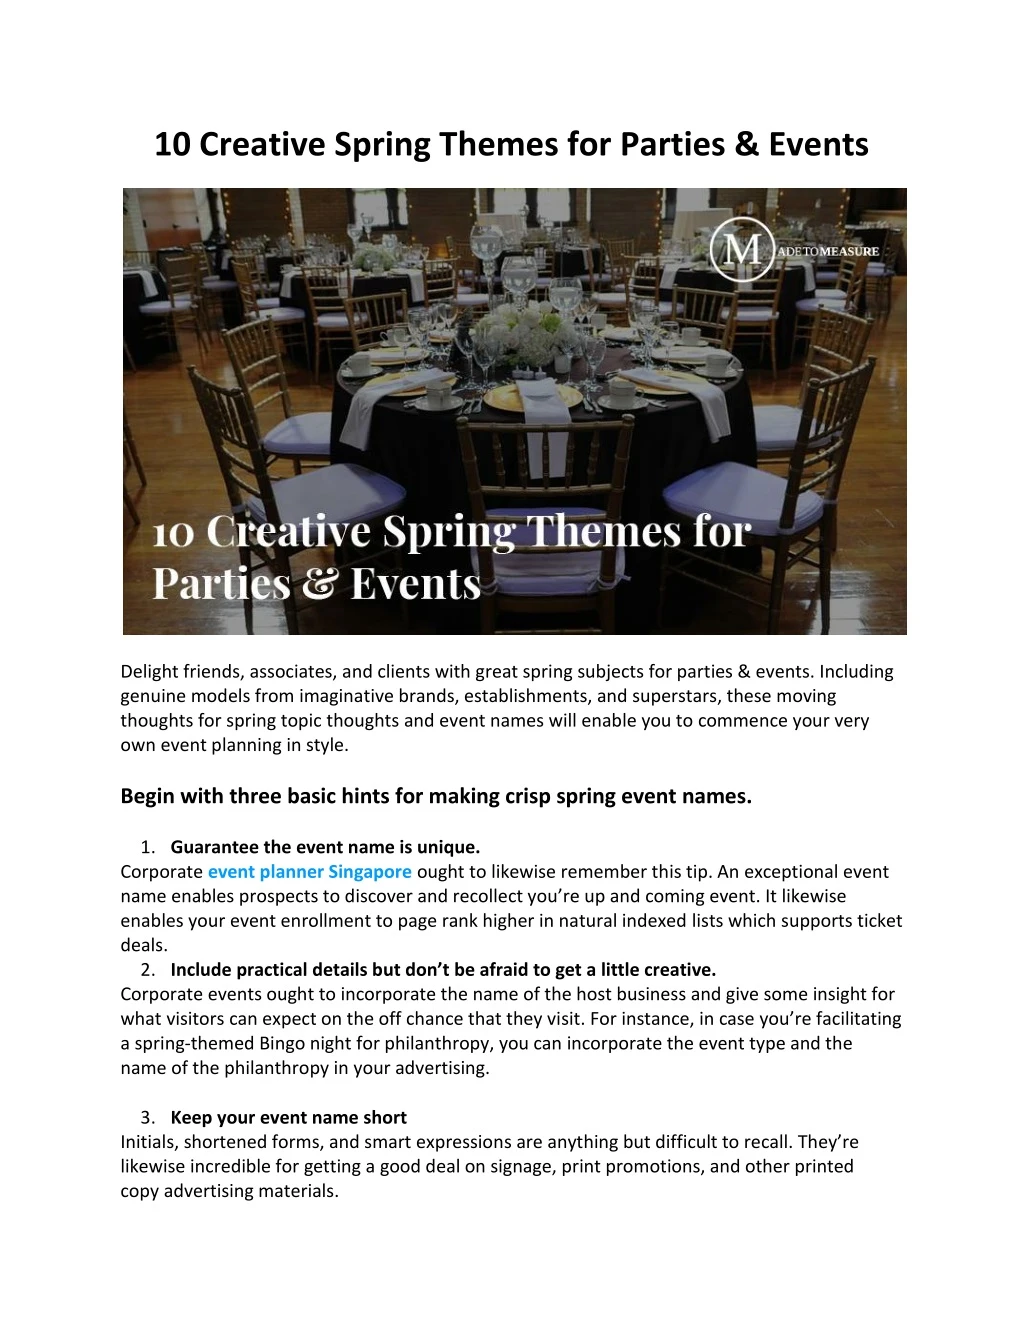 10 creative spring themes for parties events